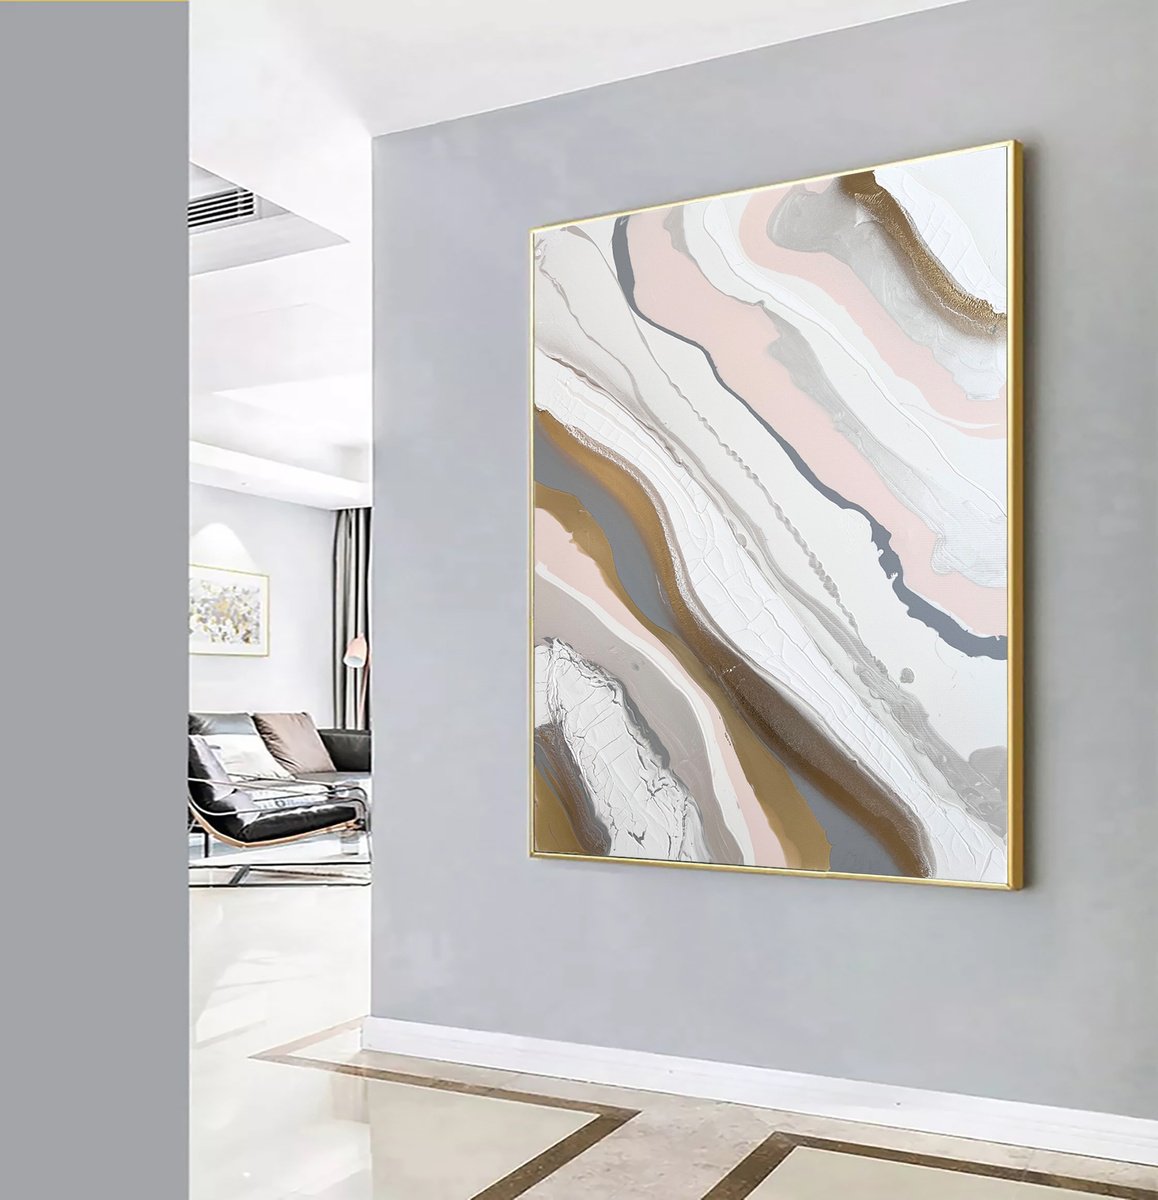 110x90cm. Gold White Abstract painting. Earth, fire, air. by Marina Skromova